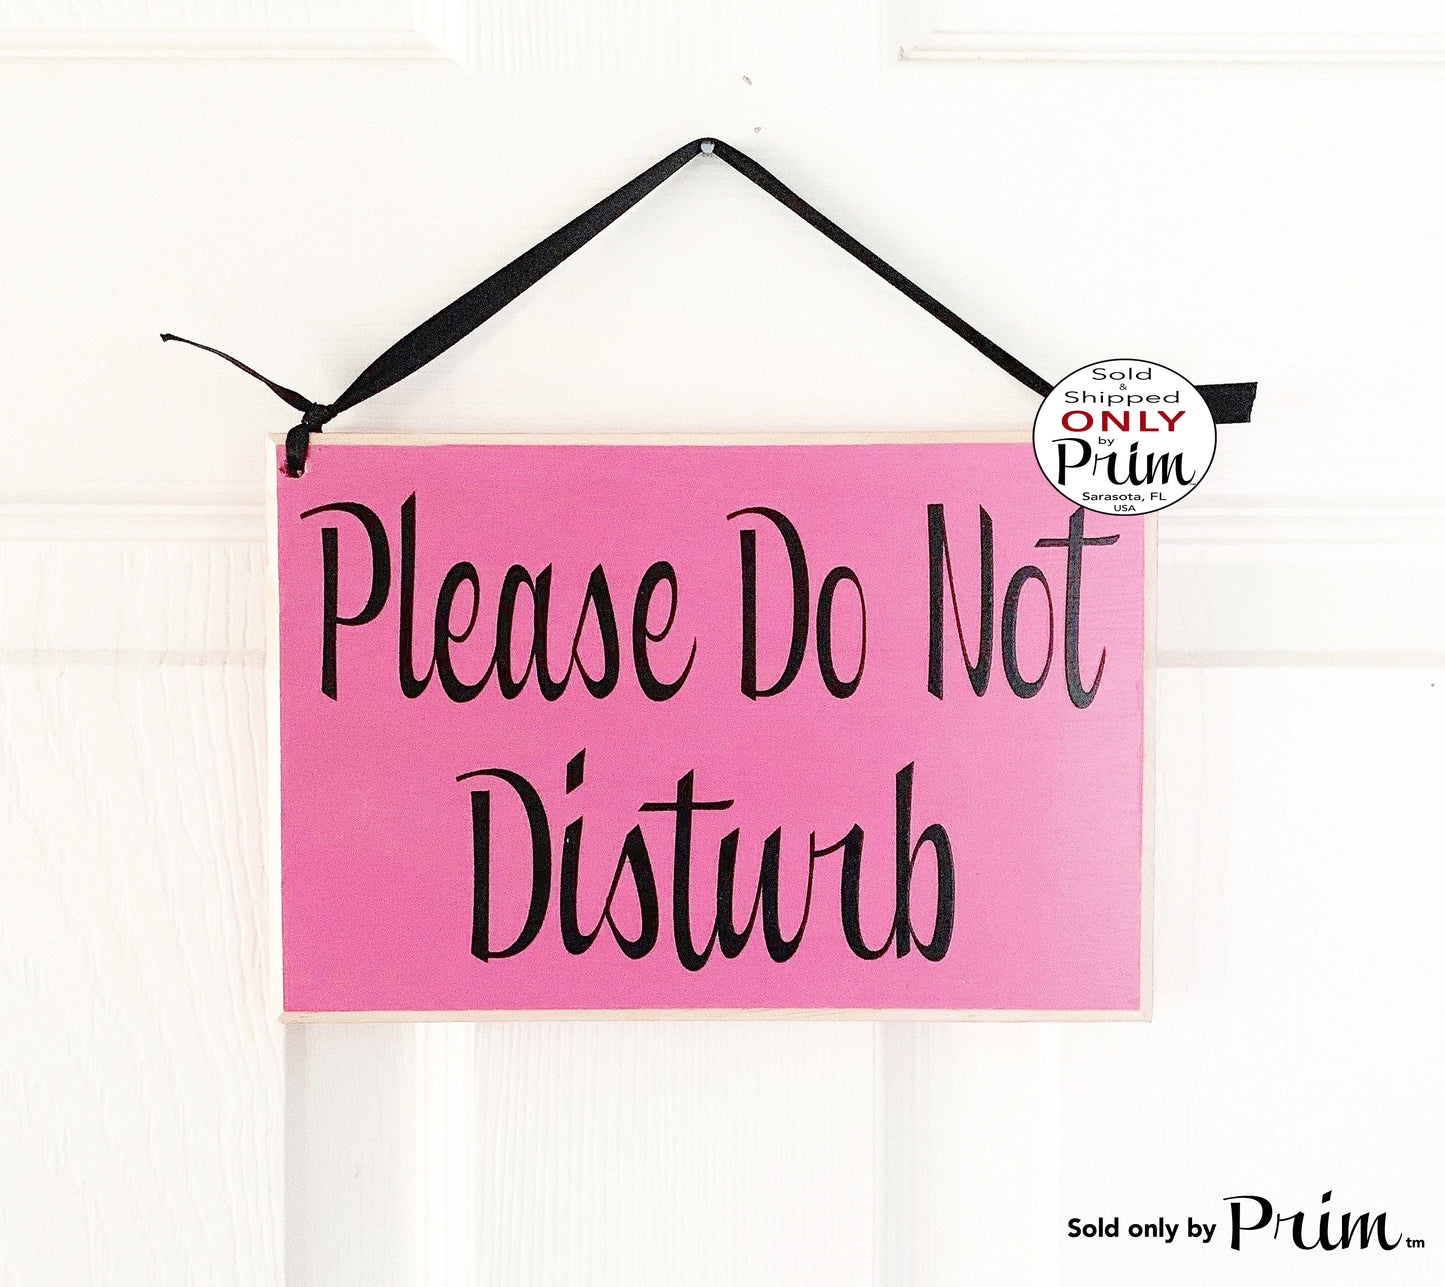 8x6 Please Do Not Disturb Custom Wood Sign In Session Progress In A Meeting Conference Do Not Enter Studying Meditating Custom Door Plaque